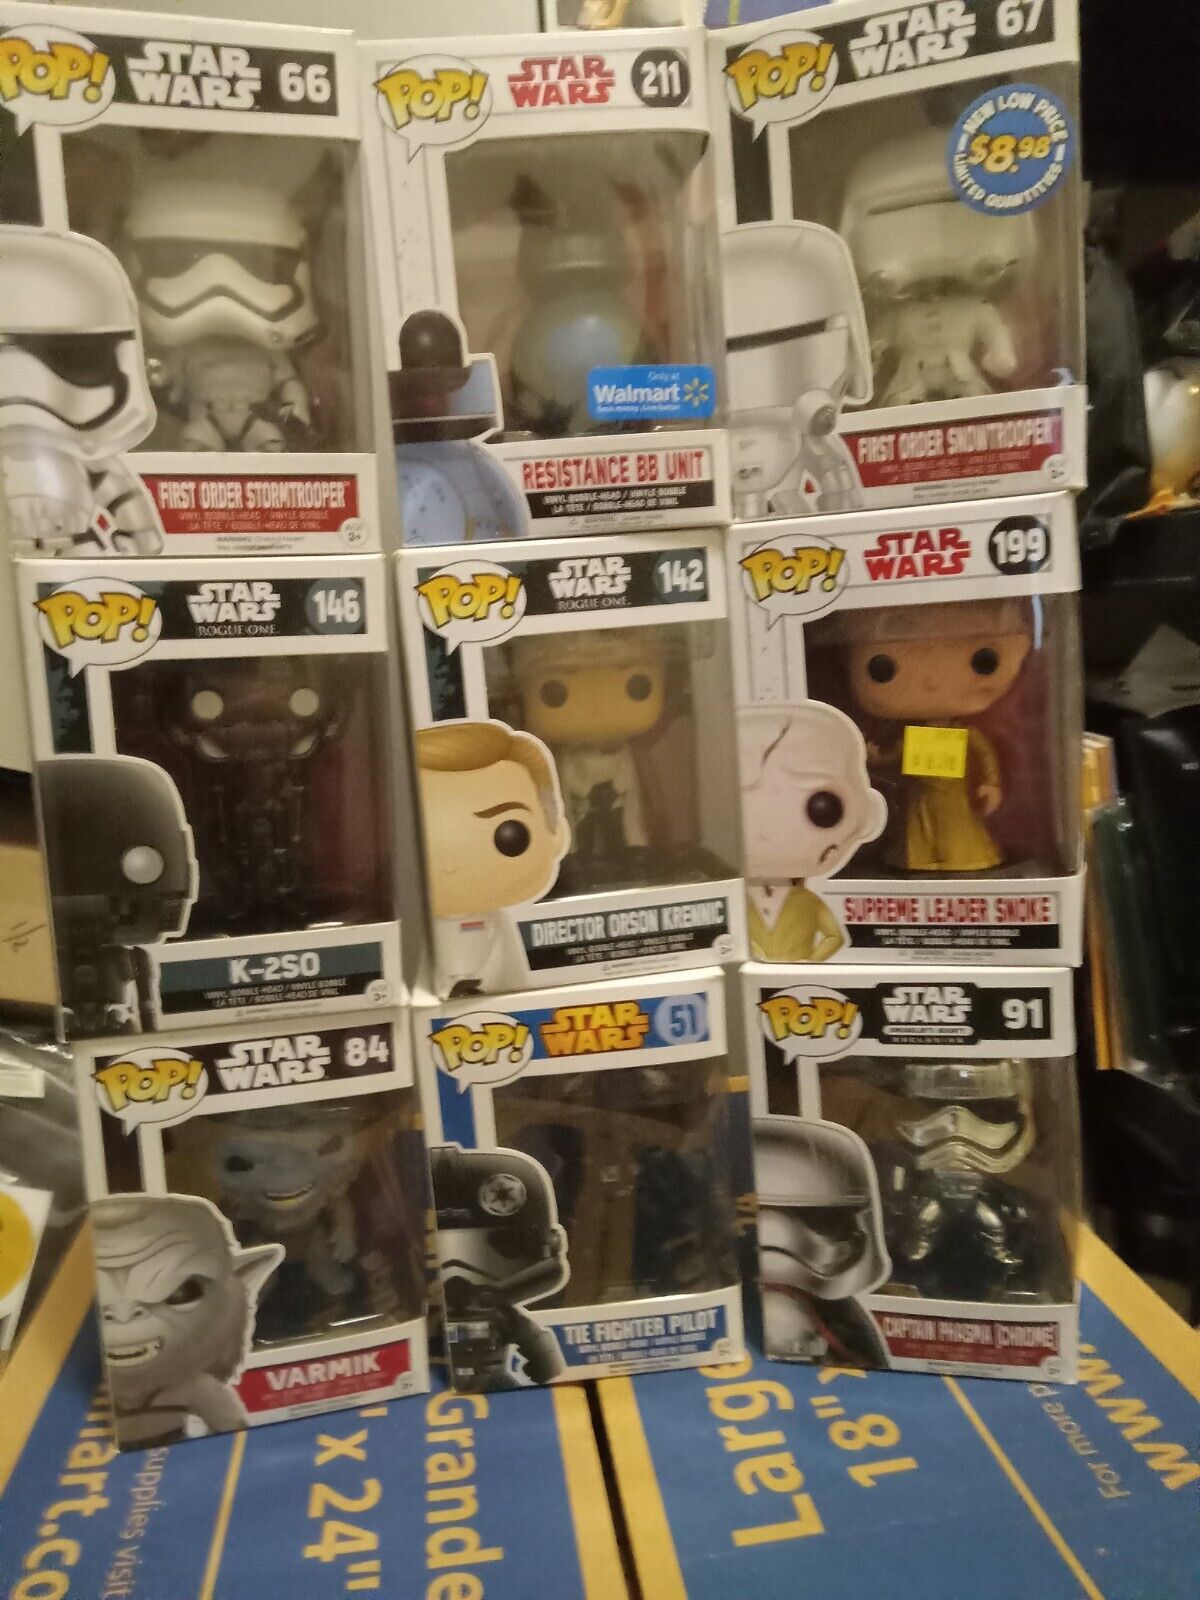  Star Wars Funko Pop Lot. Various Characters From Star Wars. 